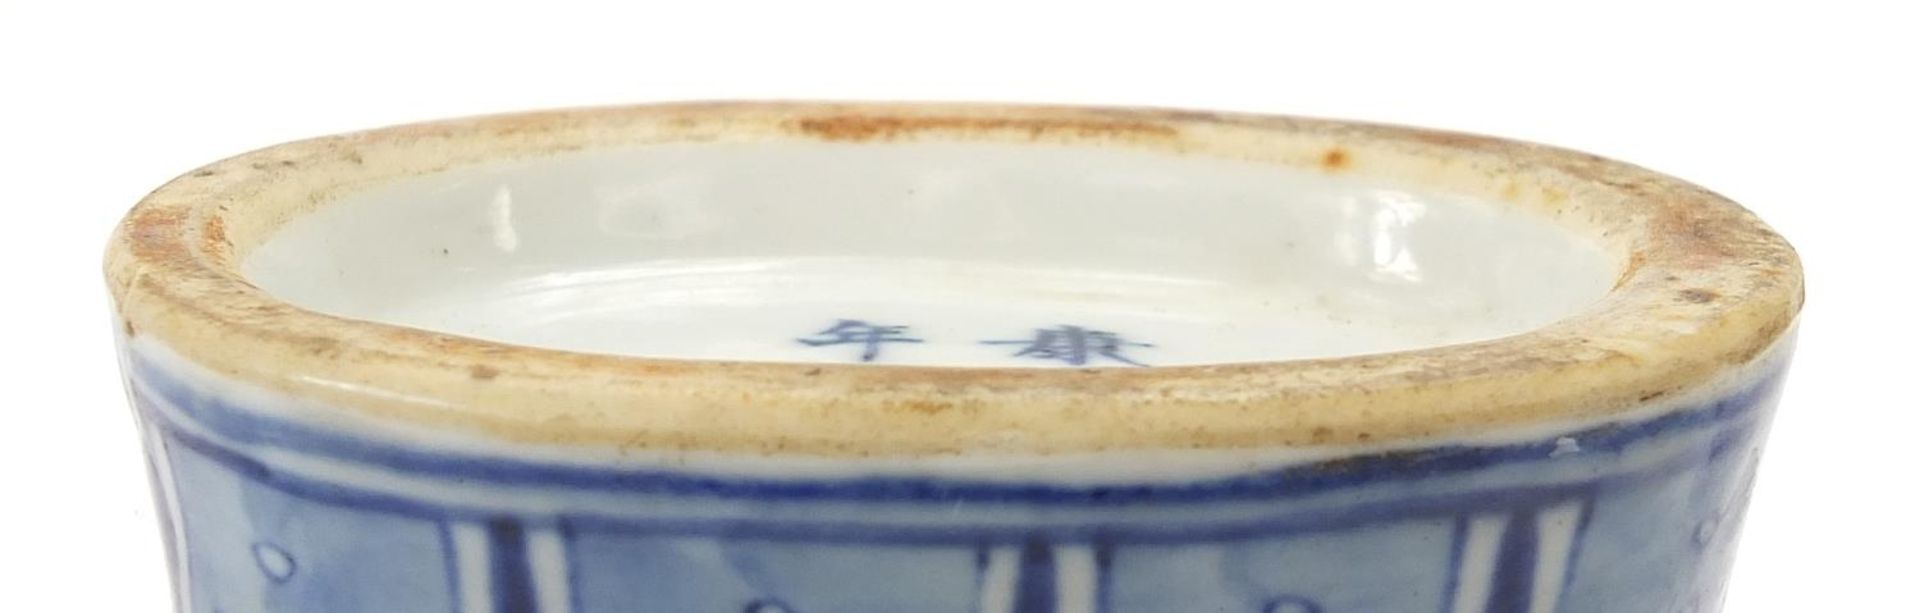 Chinese blue and white porcelain moon flask with animalia handles, finely hand painted with panels - Image 7 of 8